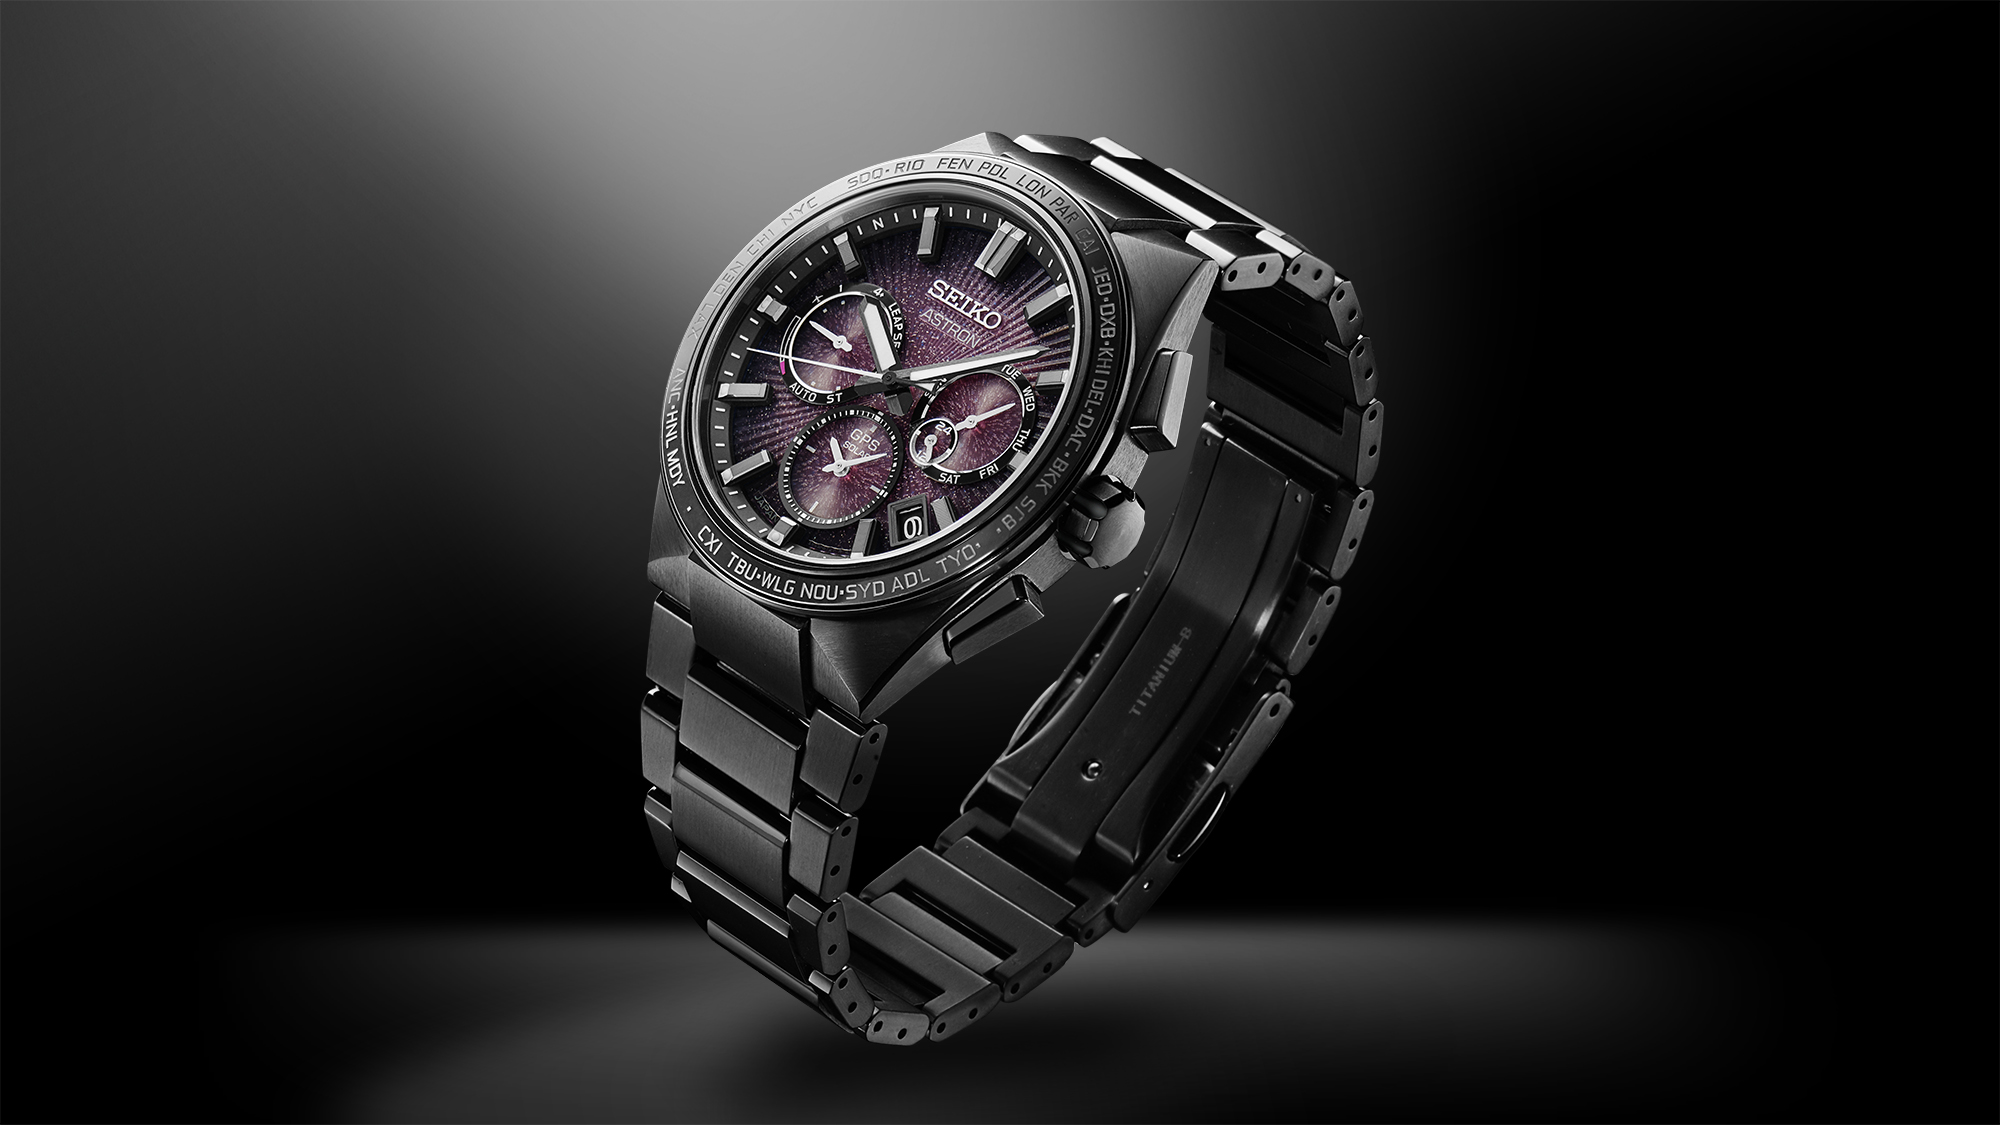 The GPS Solar Astron 10th Anniversary Limited Edition | Seiko Watch  Corporation